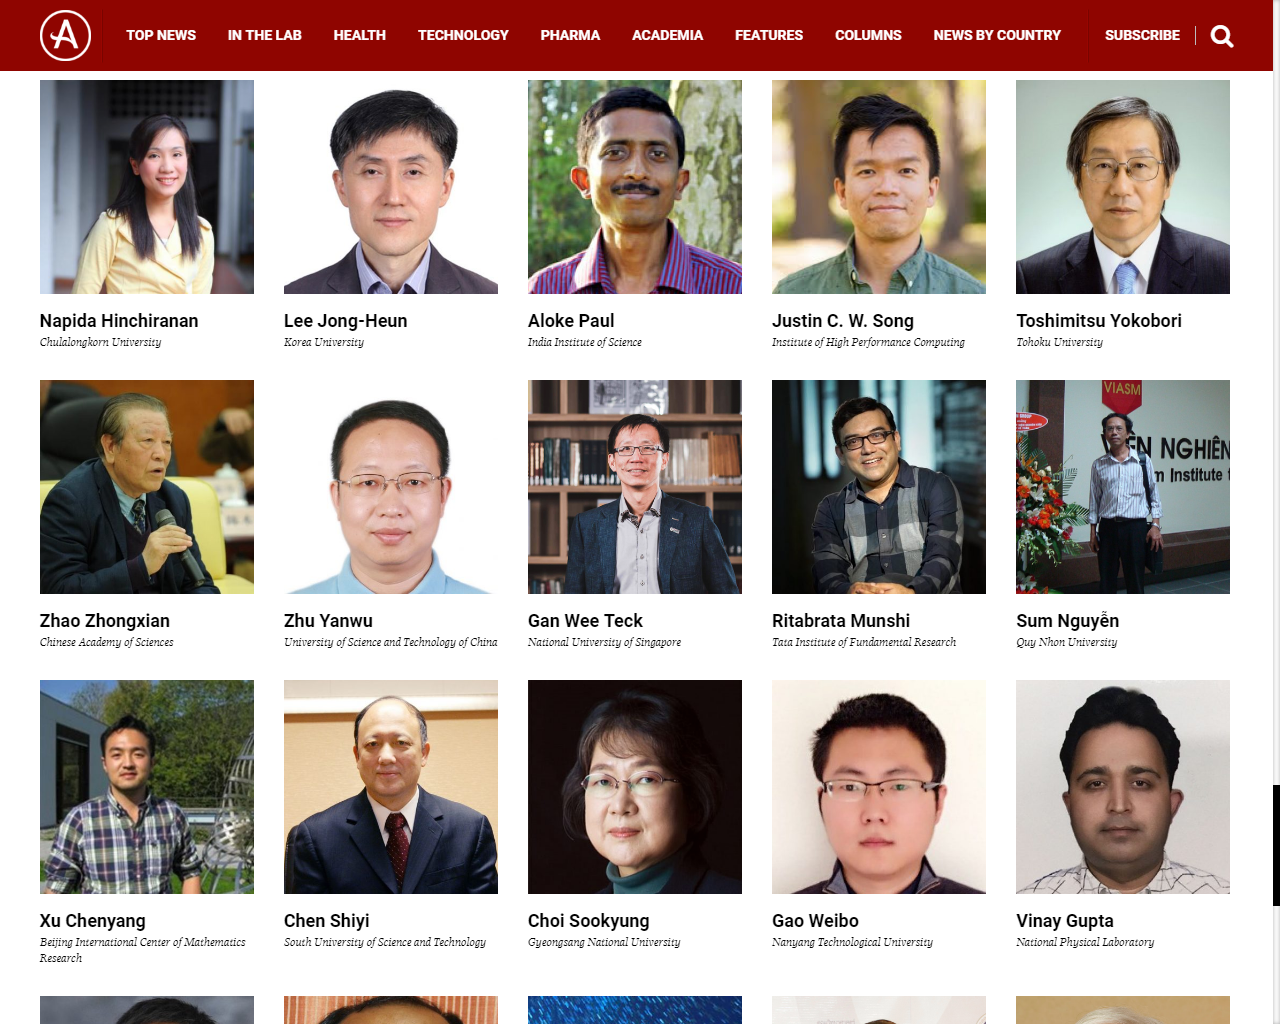 Assoc. Prof. Dr. Nguyen Sum is listed in the 2018 edition of Asian Scientist 100 in this screen grab taken from the magazine’s website.